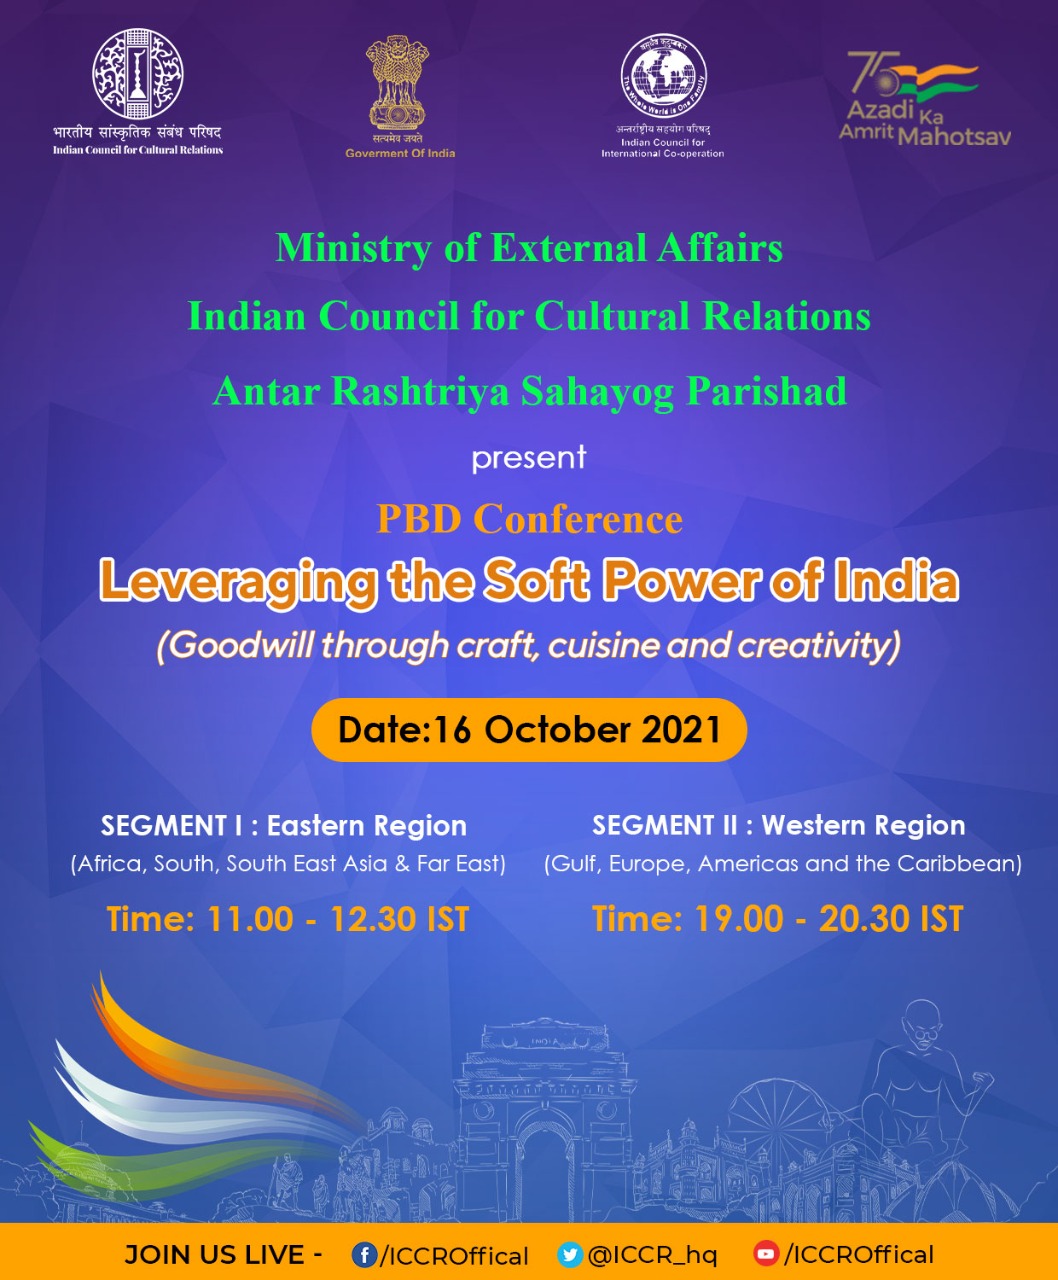 ICCR is organising International Virtual Conference "Leveraging the Soft Power of India - Goodwill through craft, cuisine and creativity" to be held on 16 October 2021 in association with Ministry of External Affaris and Antar Rashtriya Sehyog Parishad.